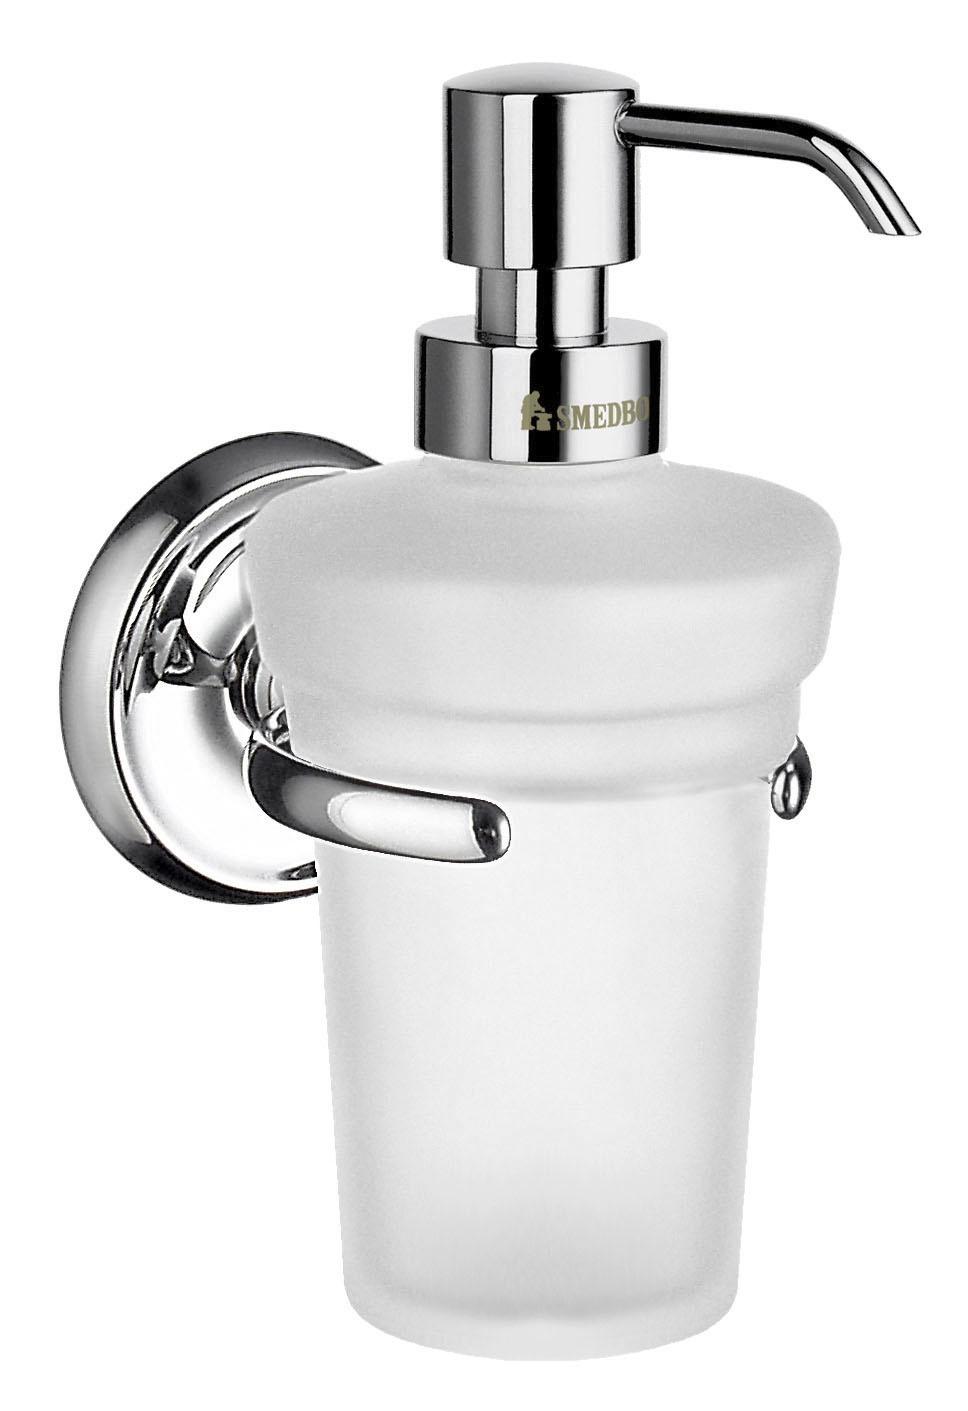 Smedbo Villa Holder with Frosted Glass Soap Dispenser in Polished Chrome